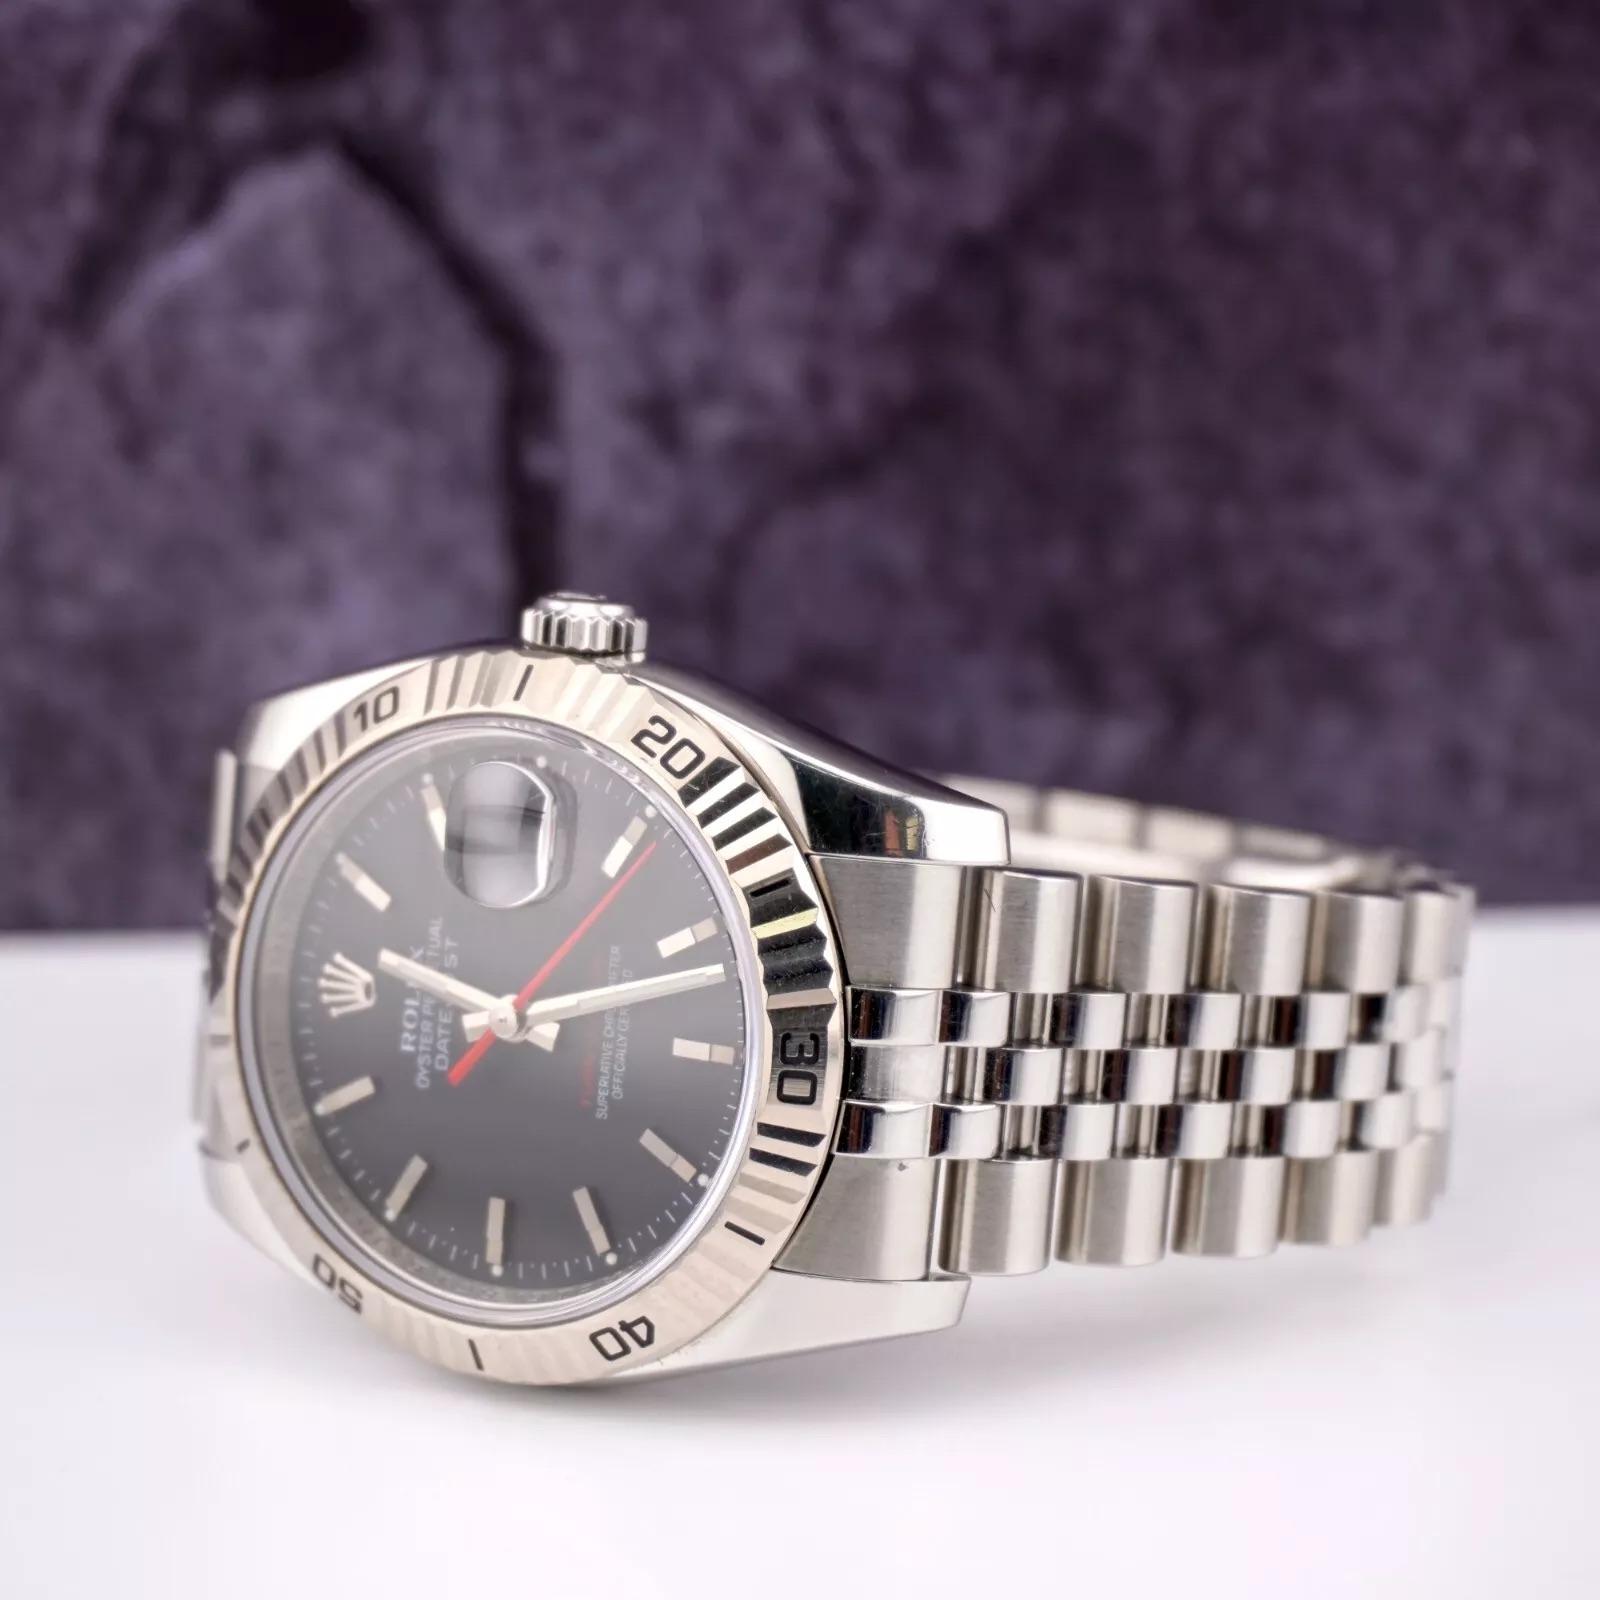 Rolex Men Datejust 36mm Turn-O-Graph Steel Jubilee Black Dial Watch Ref: 116264 In Excellent Condition For Sale In Pleasanton, CA